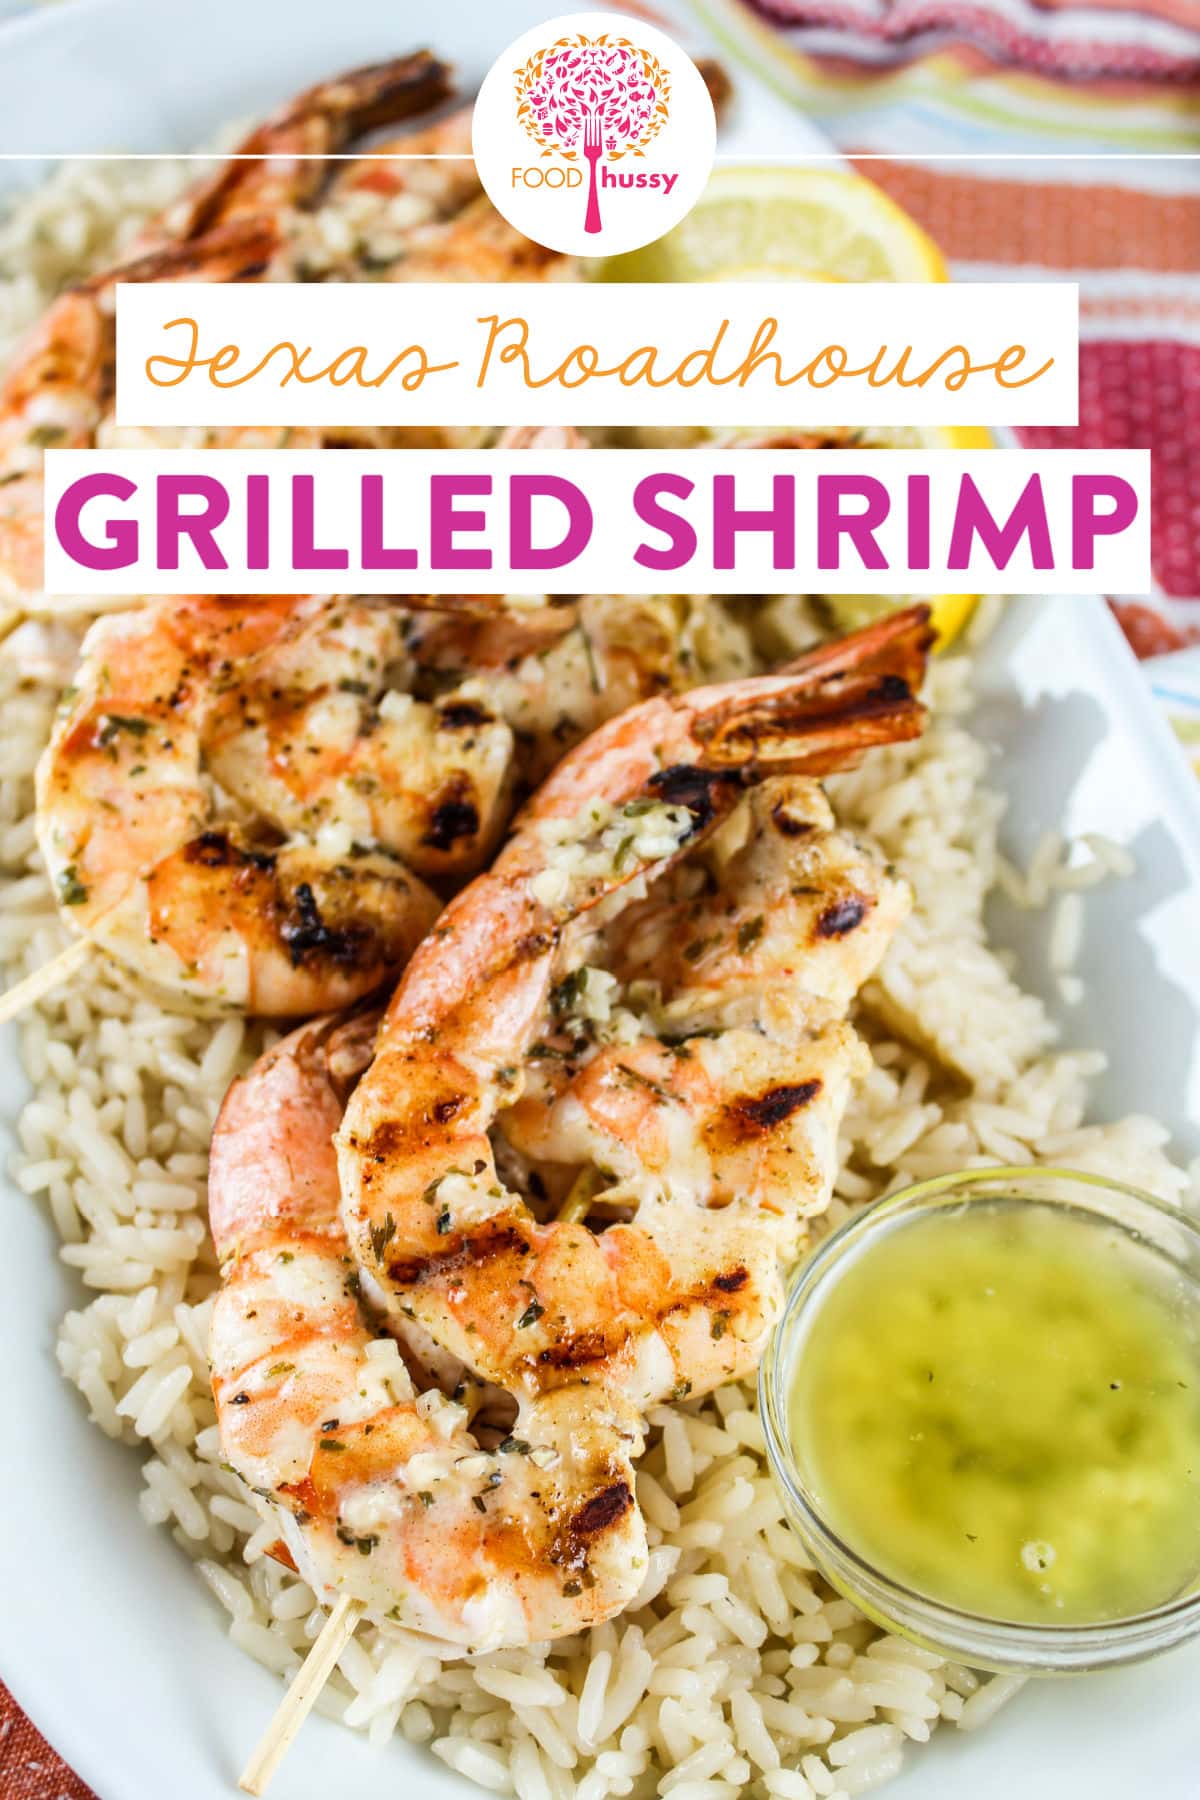 This Copycat Texas Roadhouse Grilled Shrimp is seasoned perfectly and drizzled with a savory Garlic Lemon Pepper Butter. After a quick marinade, these flavor filled shrimp are ready in just 5 minutes! via @foodhussy